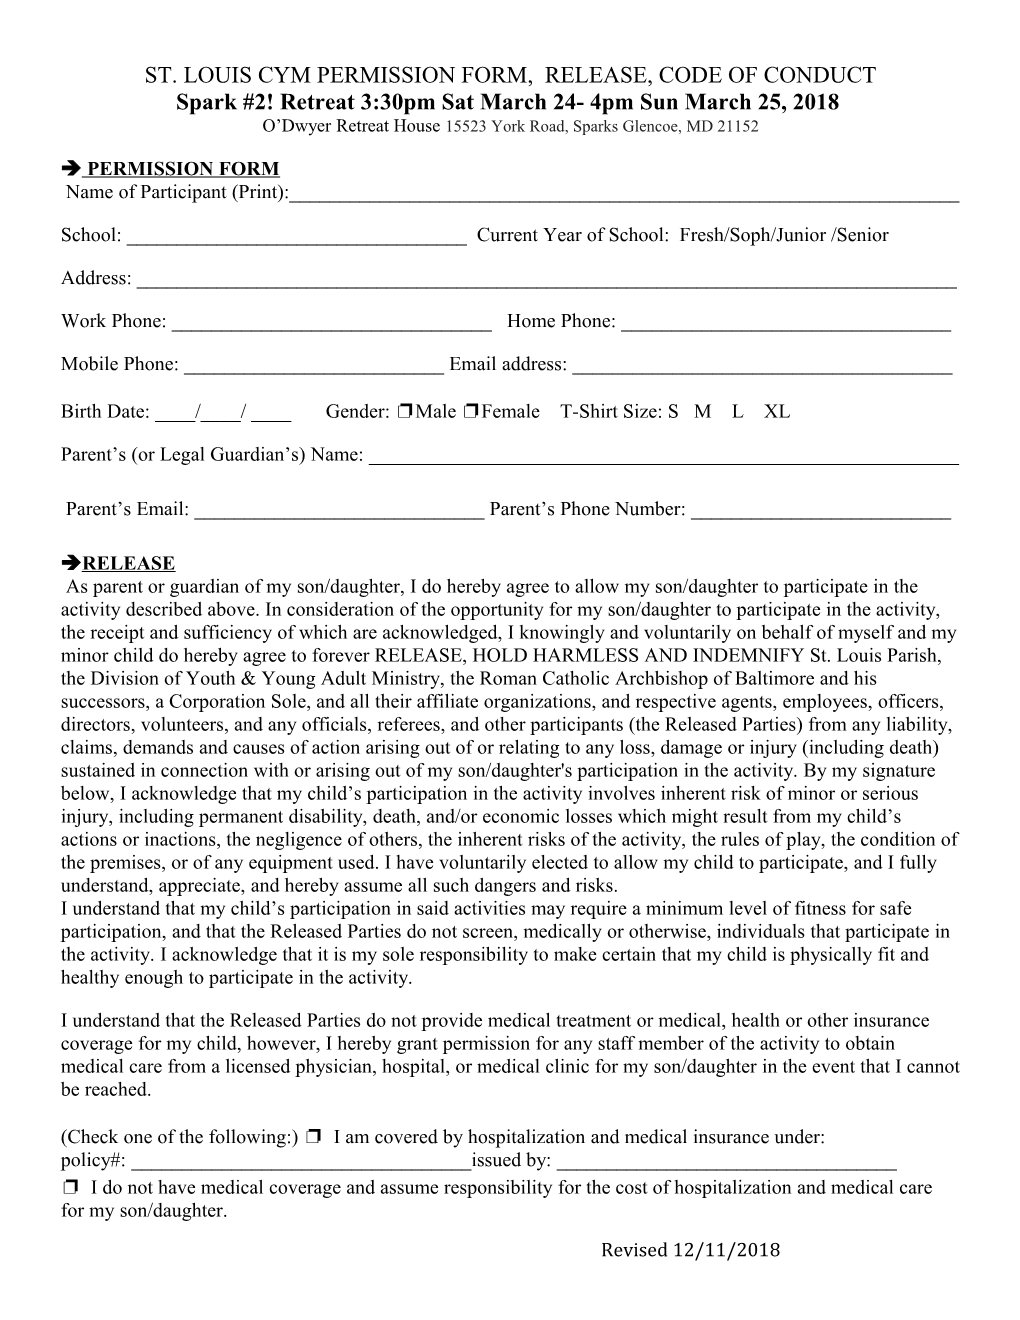 St. Louis Cym Permission Form, Release, Code of Conduct